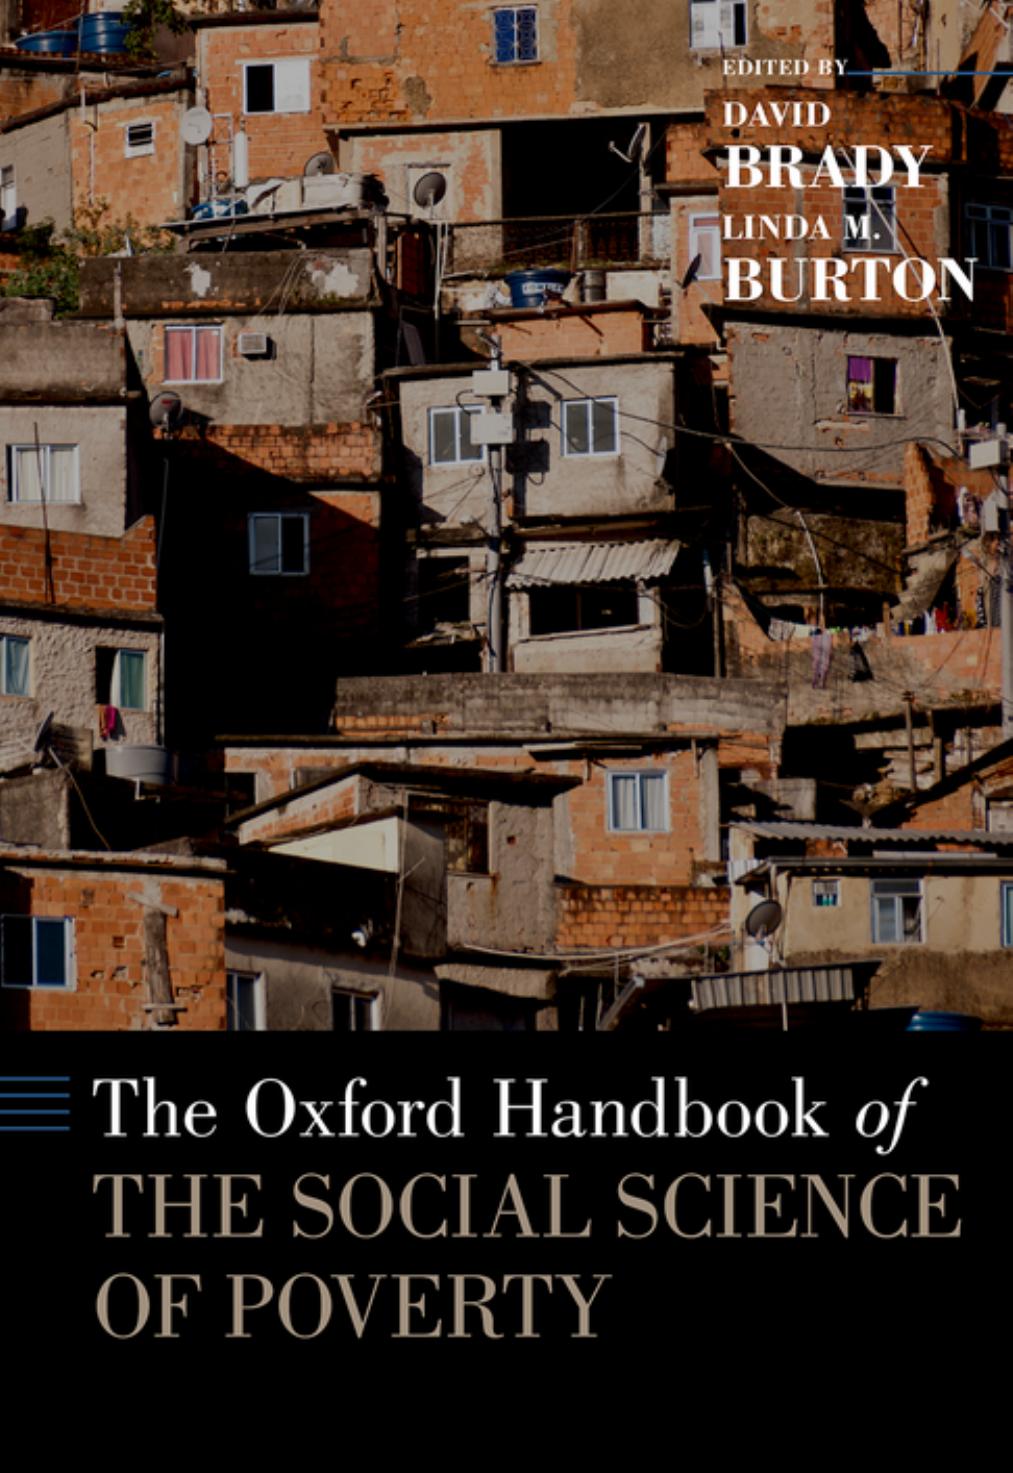 The Oxford Handbook of the Social Science of Poverty